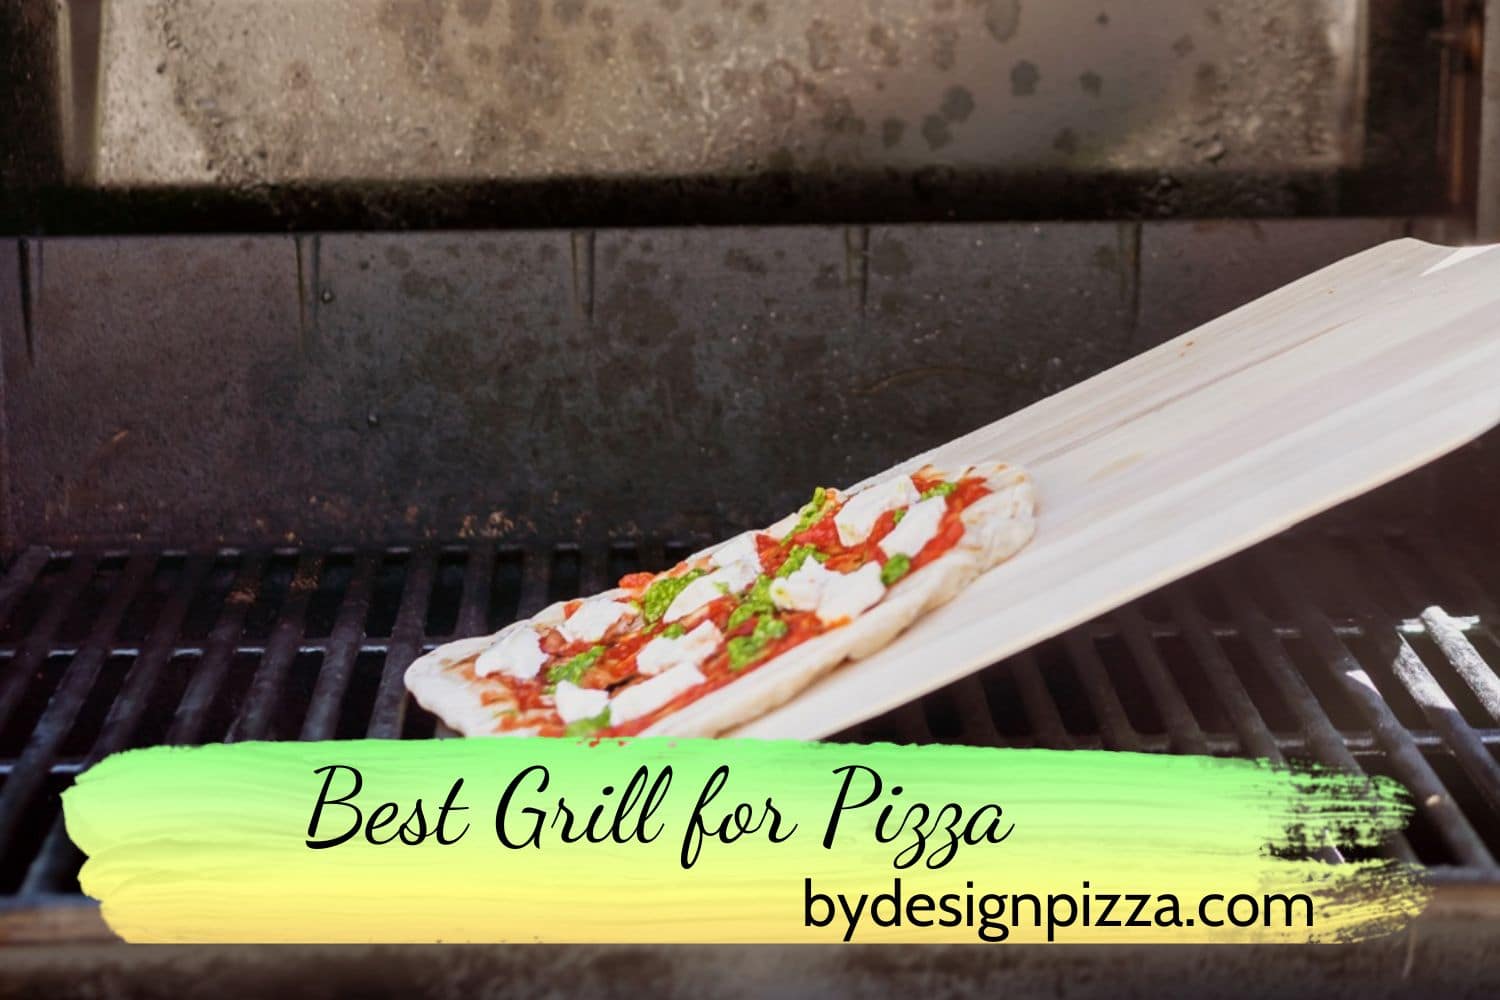 Best Grill for Pizza